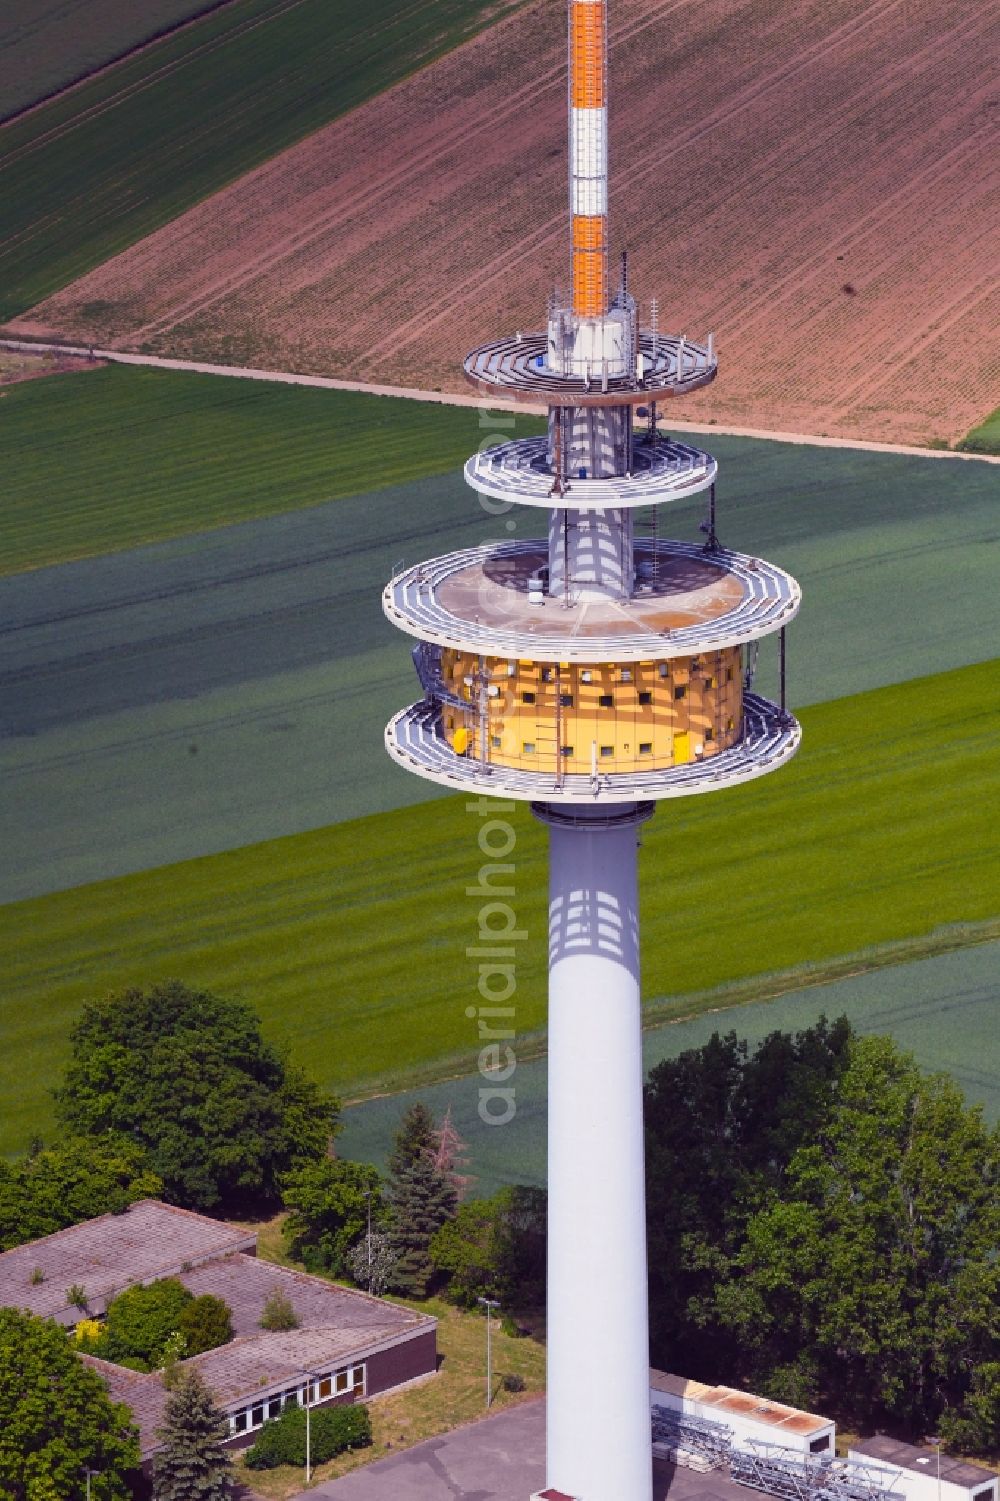 Aerial image Ober-Olm - Television Tower in Ober-Olm in the state Rhineland-Palatinate, Germany